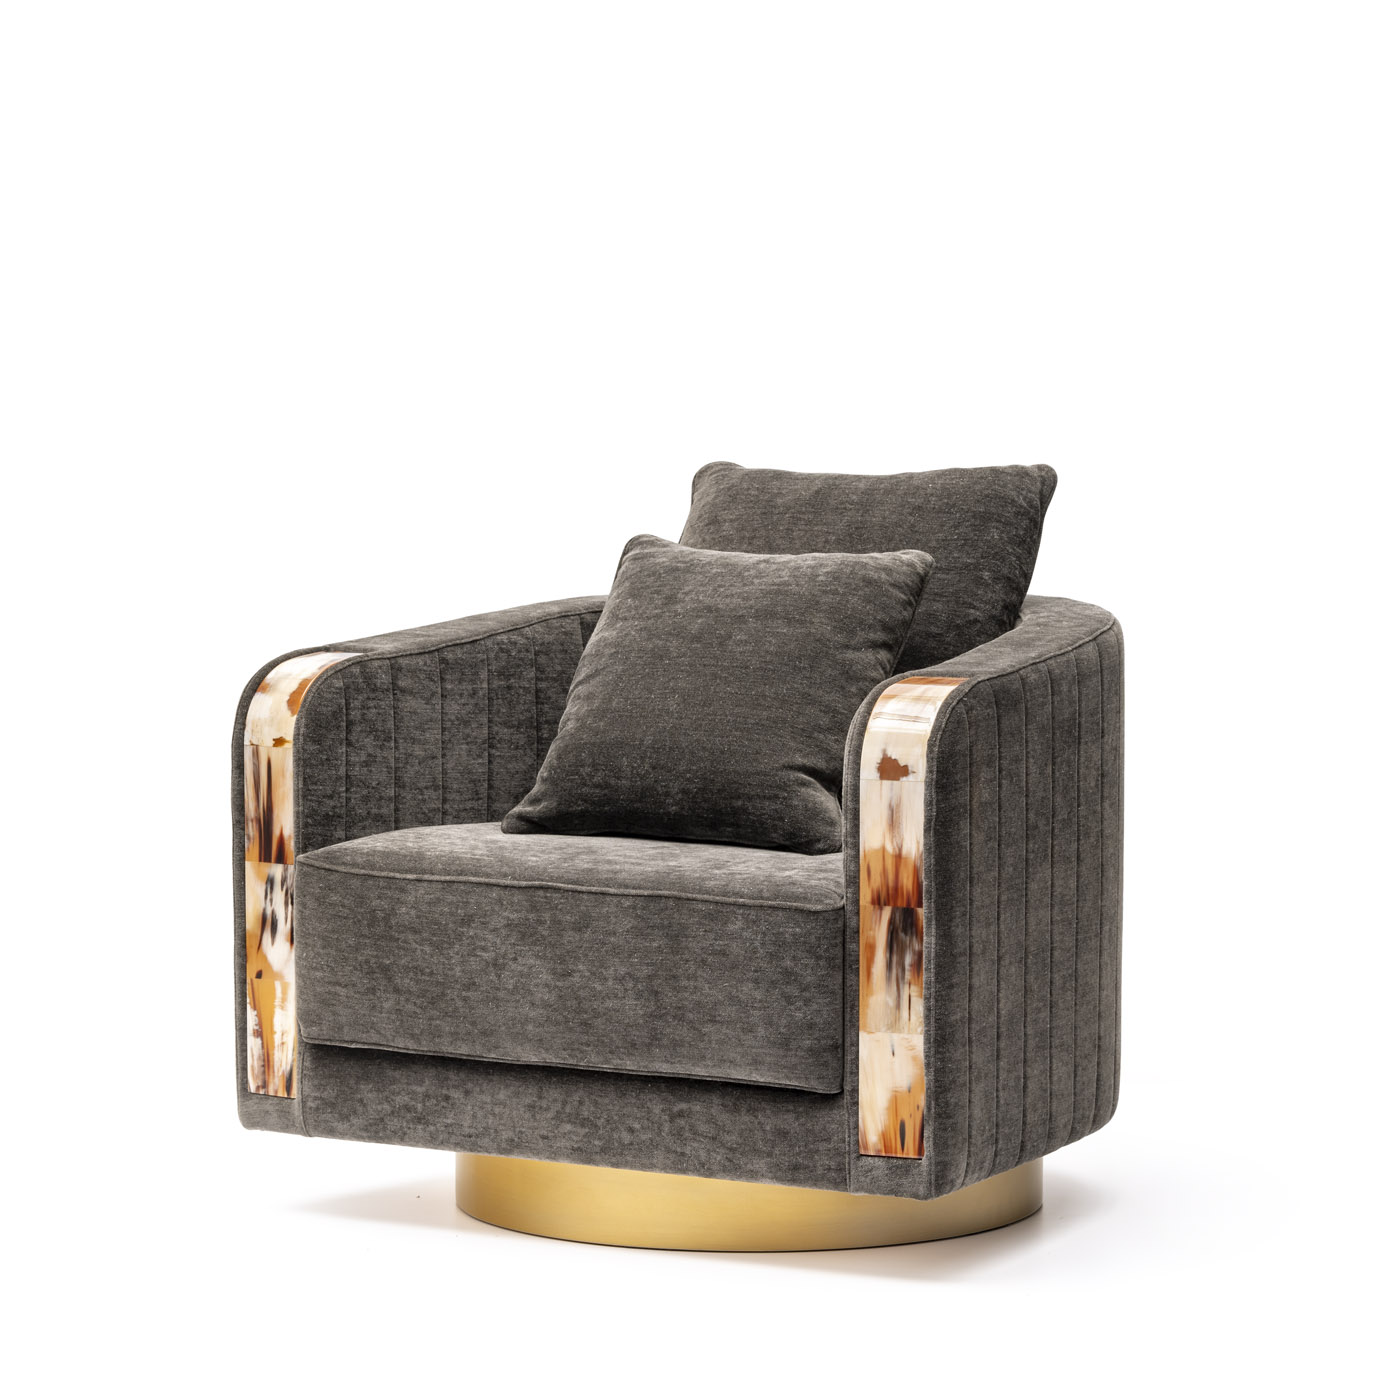 Sofas and seats - Afrodite armchair in Belsuede fabric with horn armrests mod. 7044B - Arcahorn